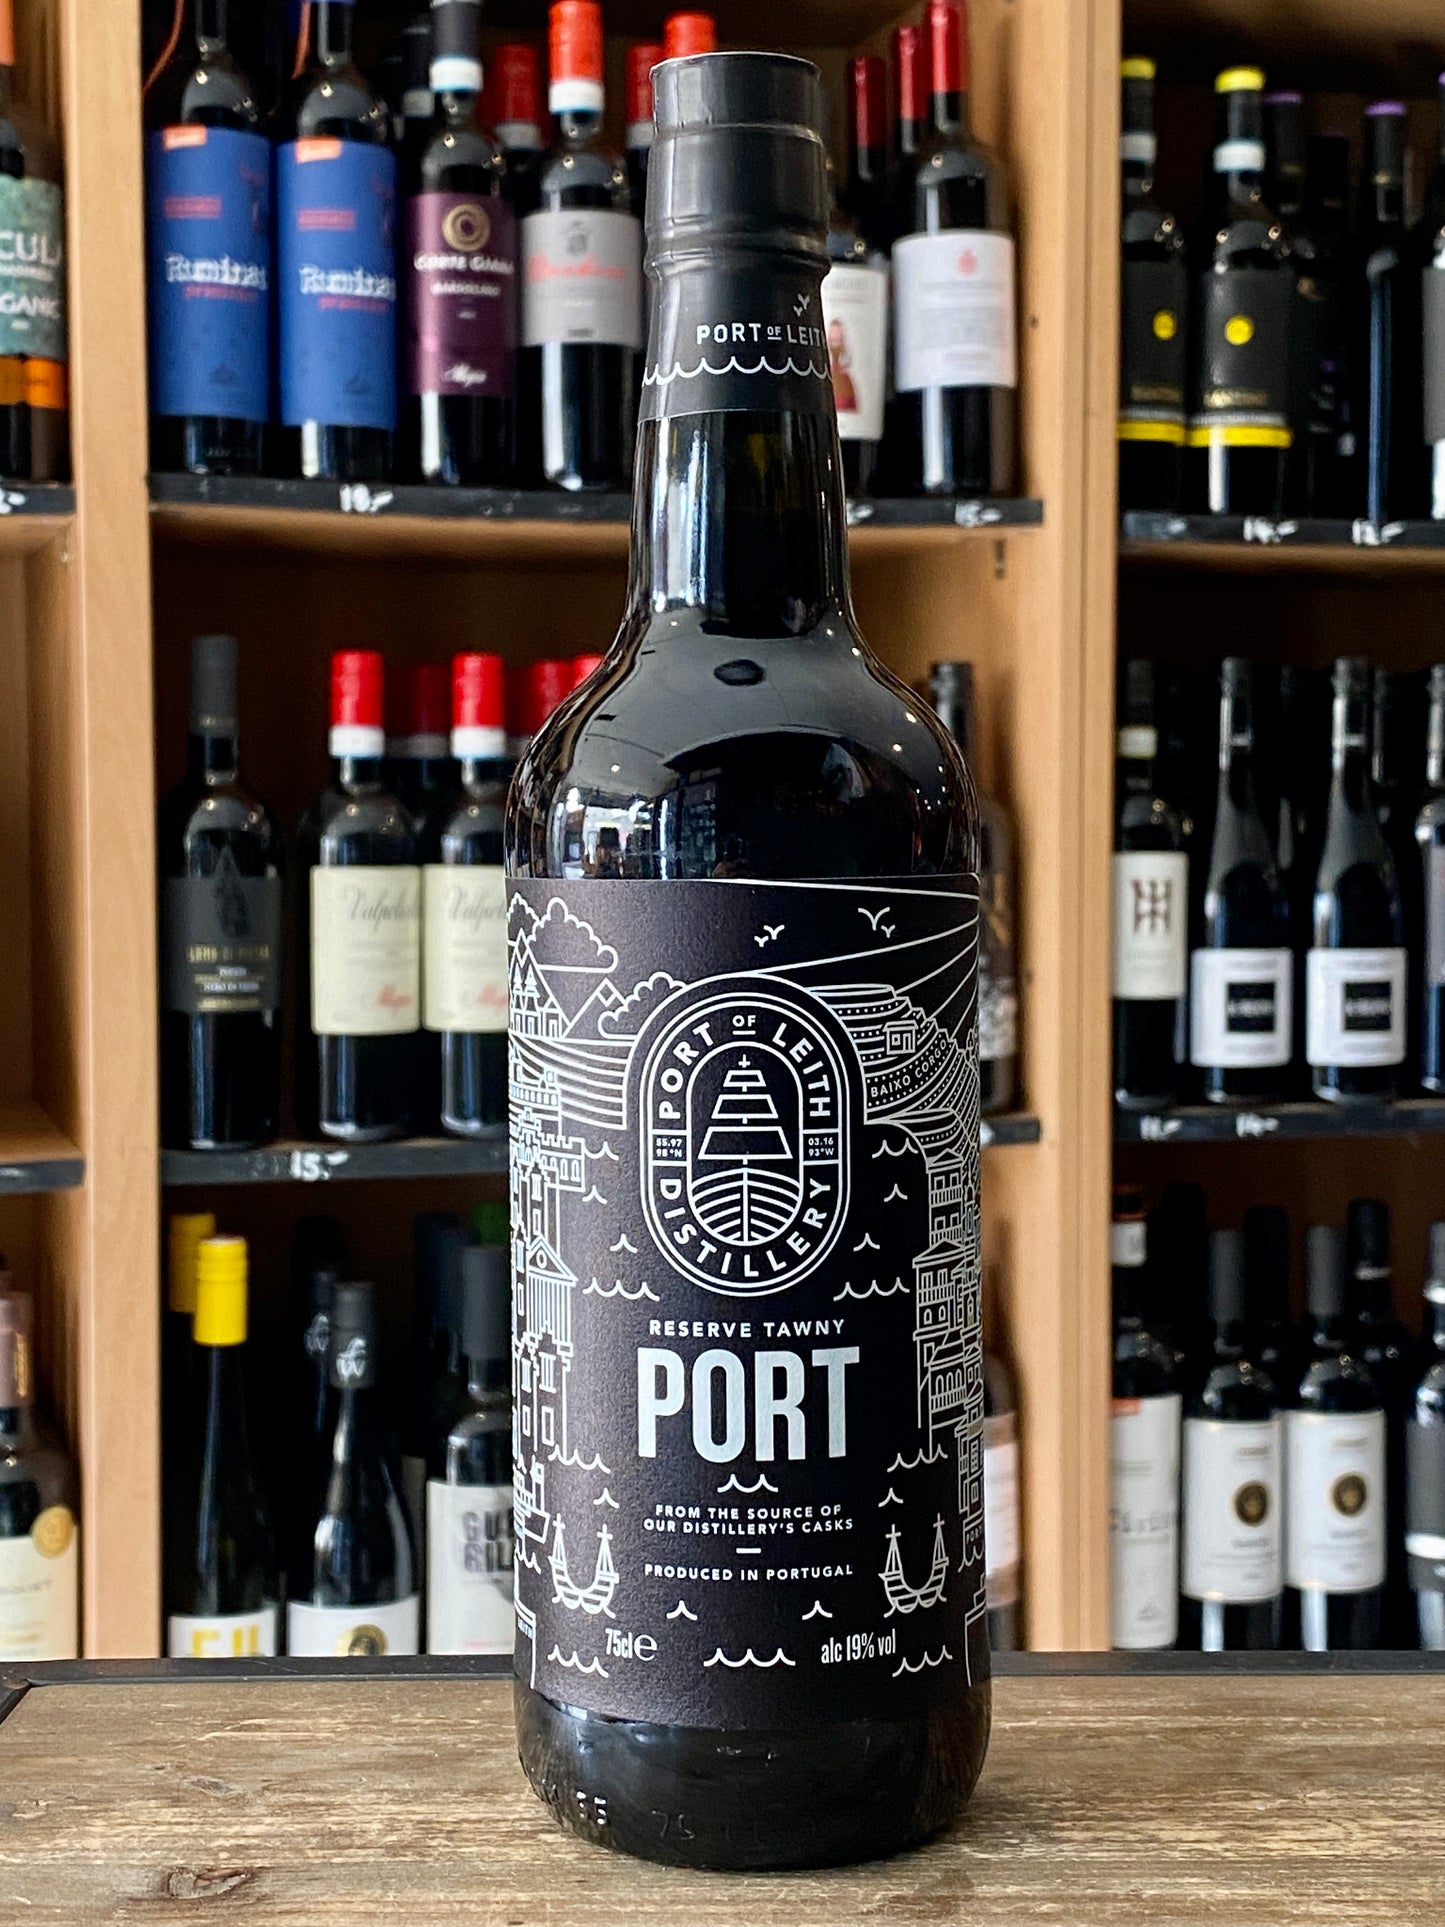 Port of Leith Reserve Tawny Port